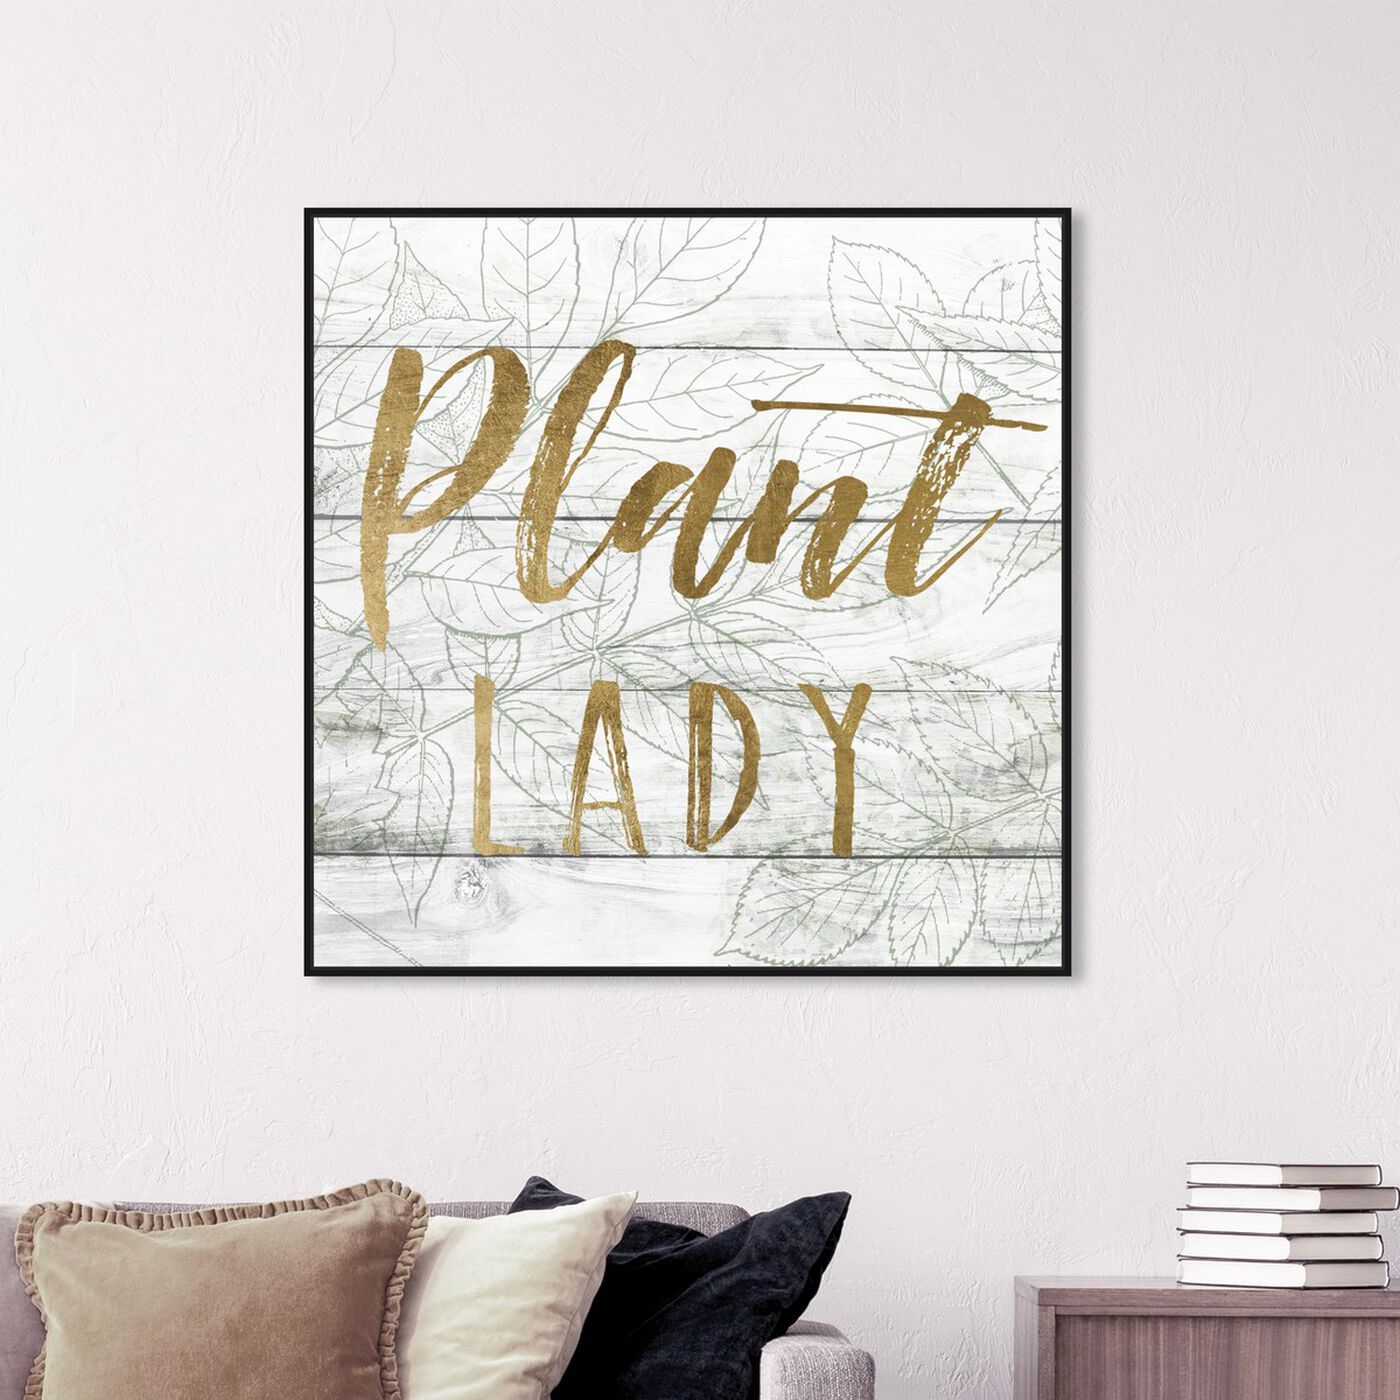 Hanging view of Plant Lady featuring typography and quotes and empowered women quotes and sayings art.